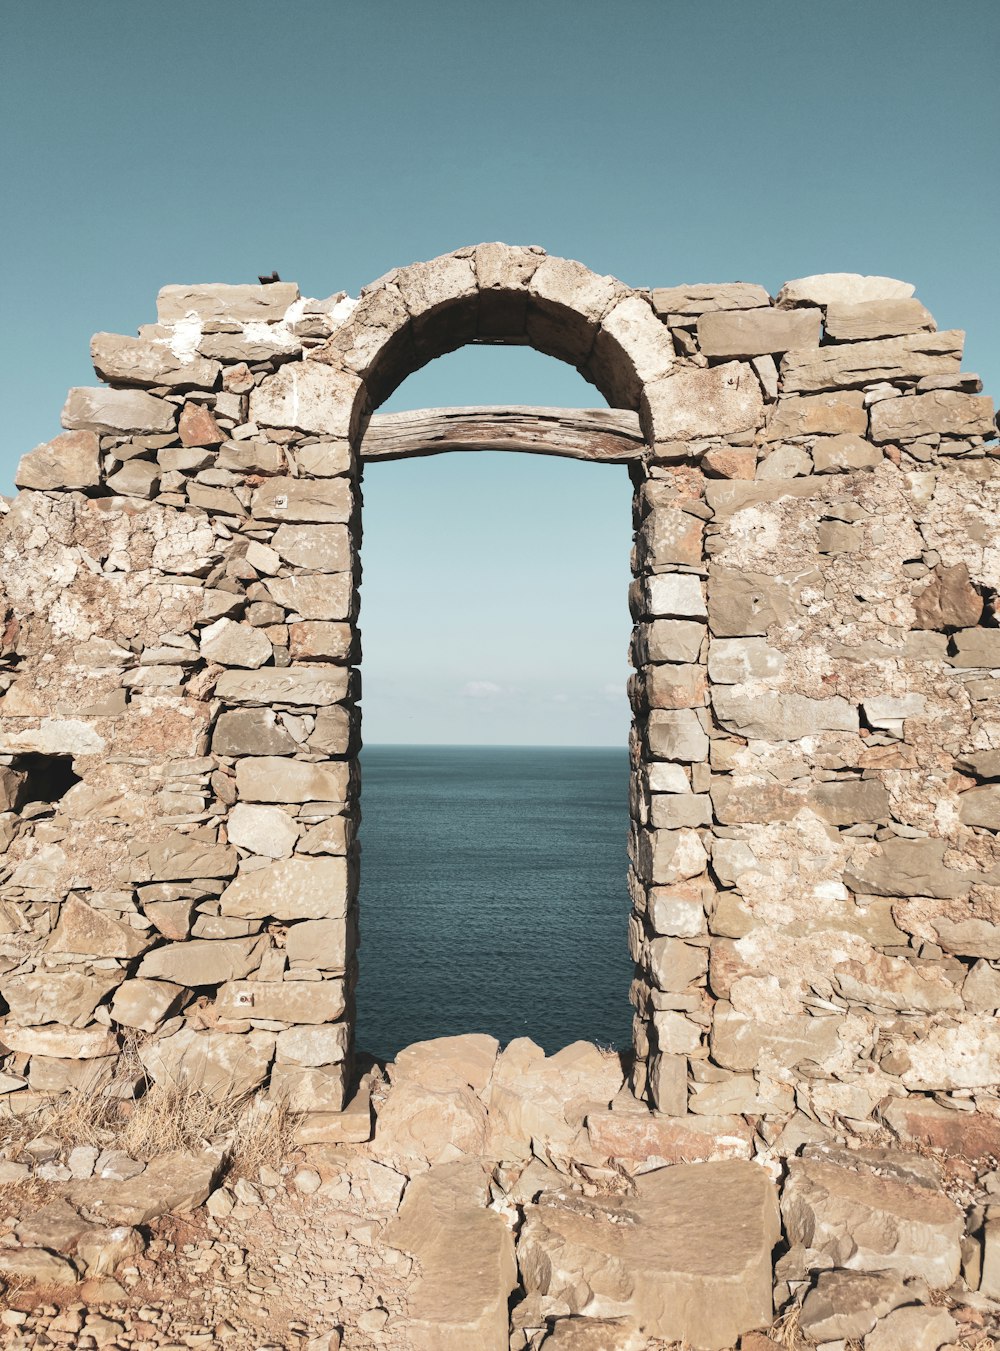 a stone archway over a body of water